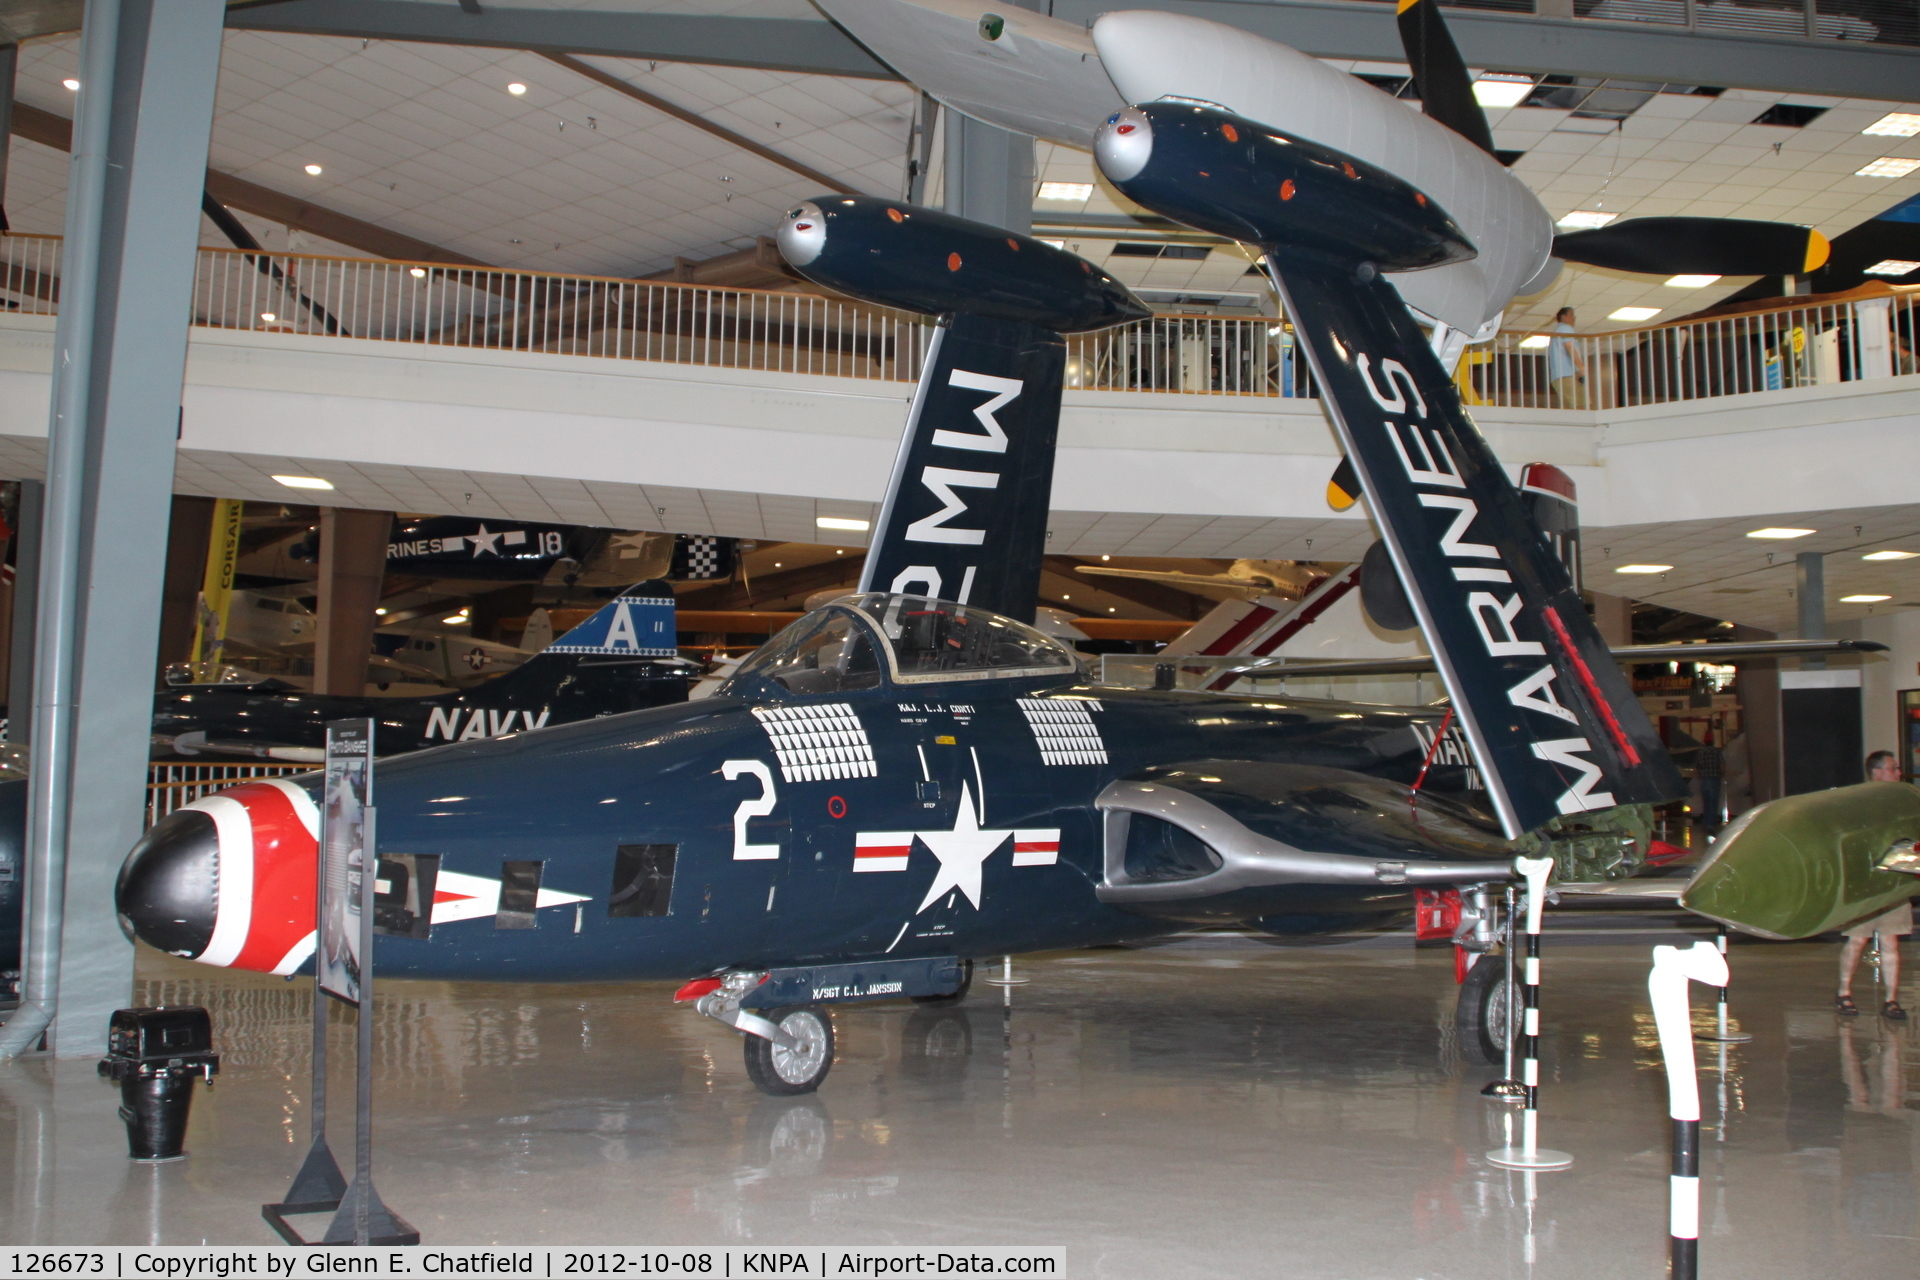 126673, McDonnell F2H-2P Banshee C/N Not found 126673, Naval Aviation Museum